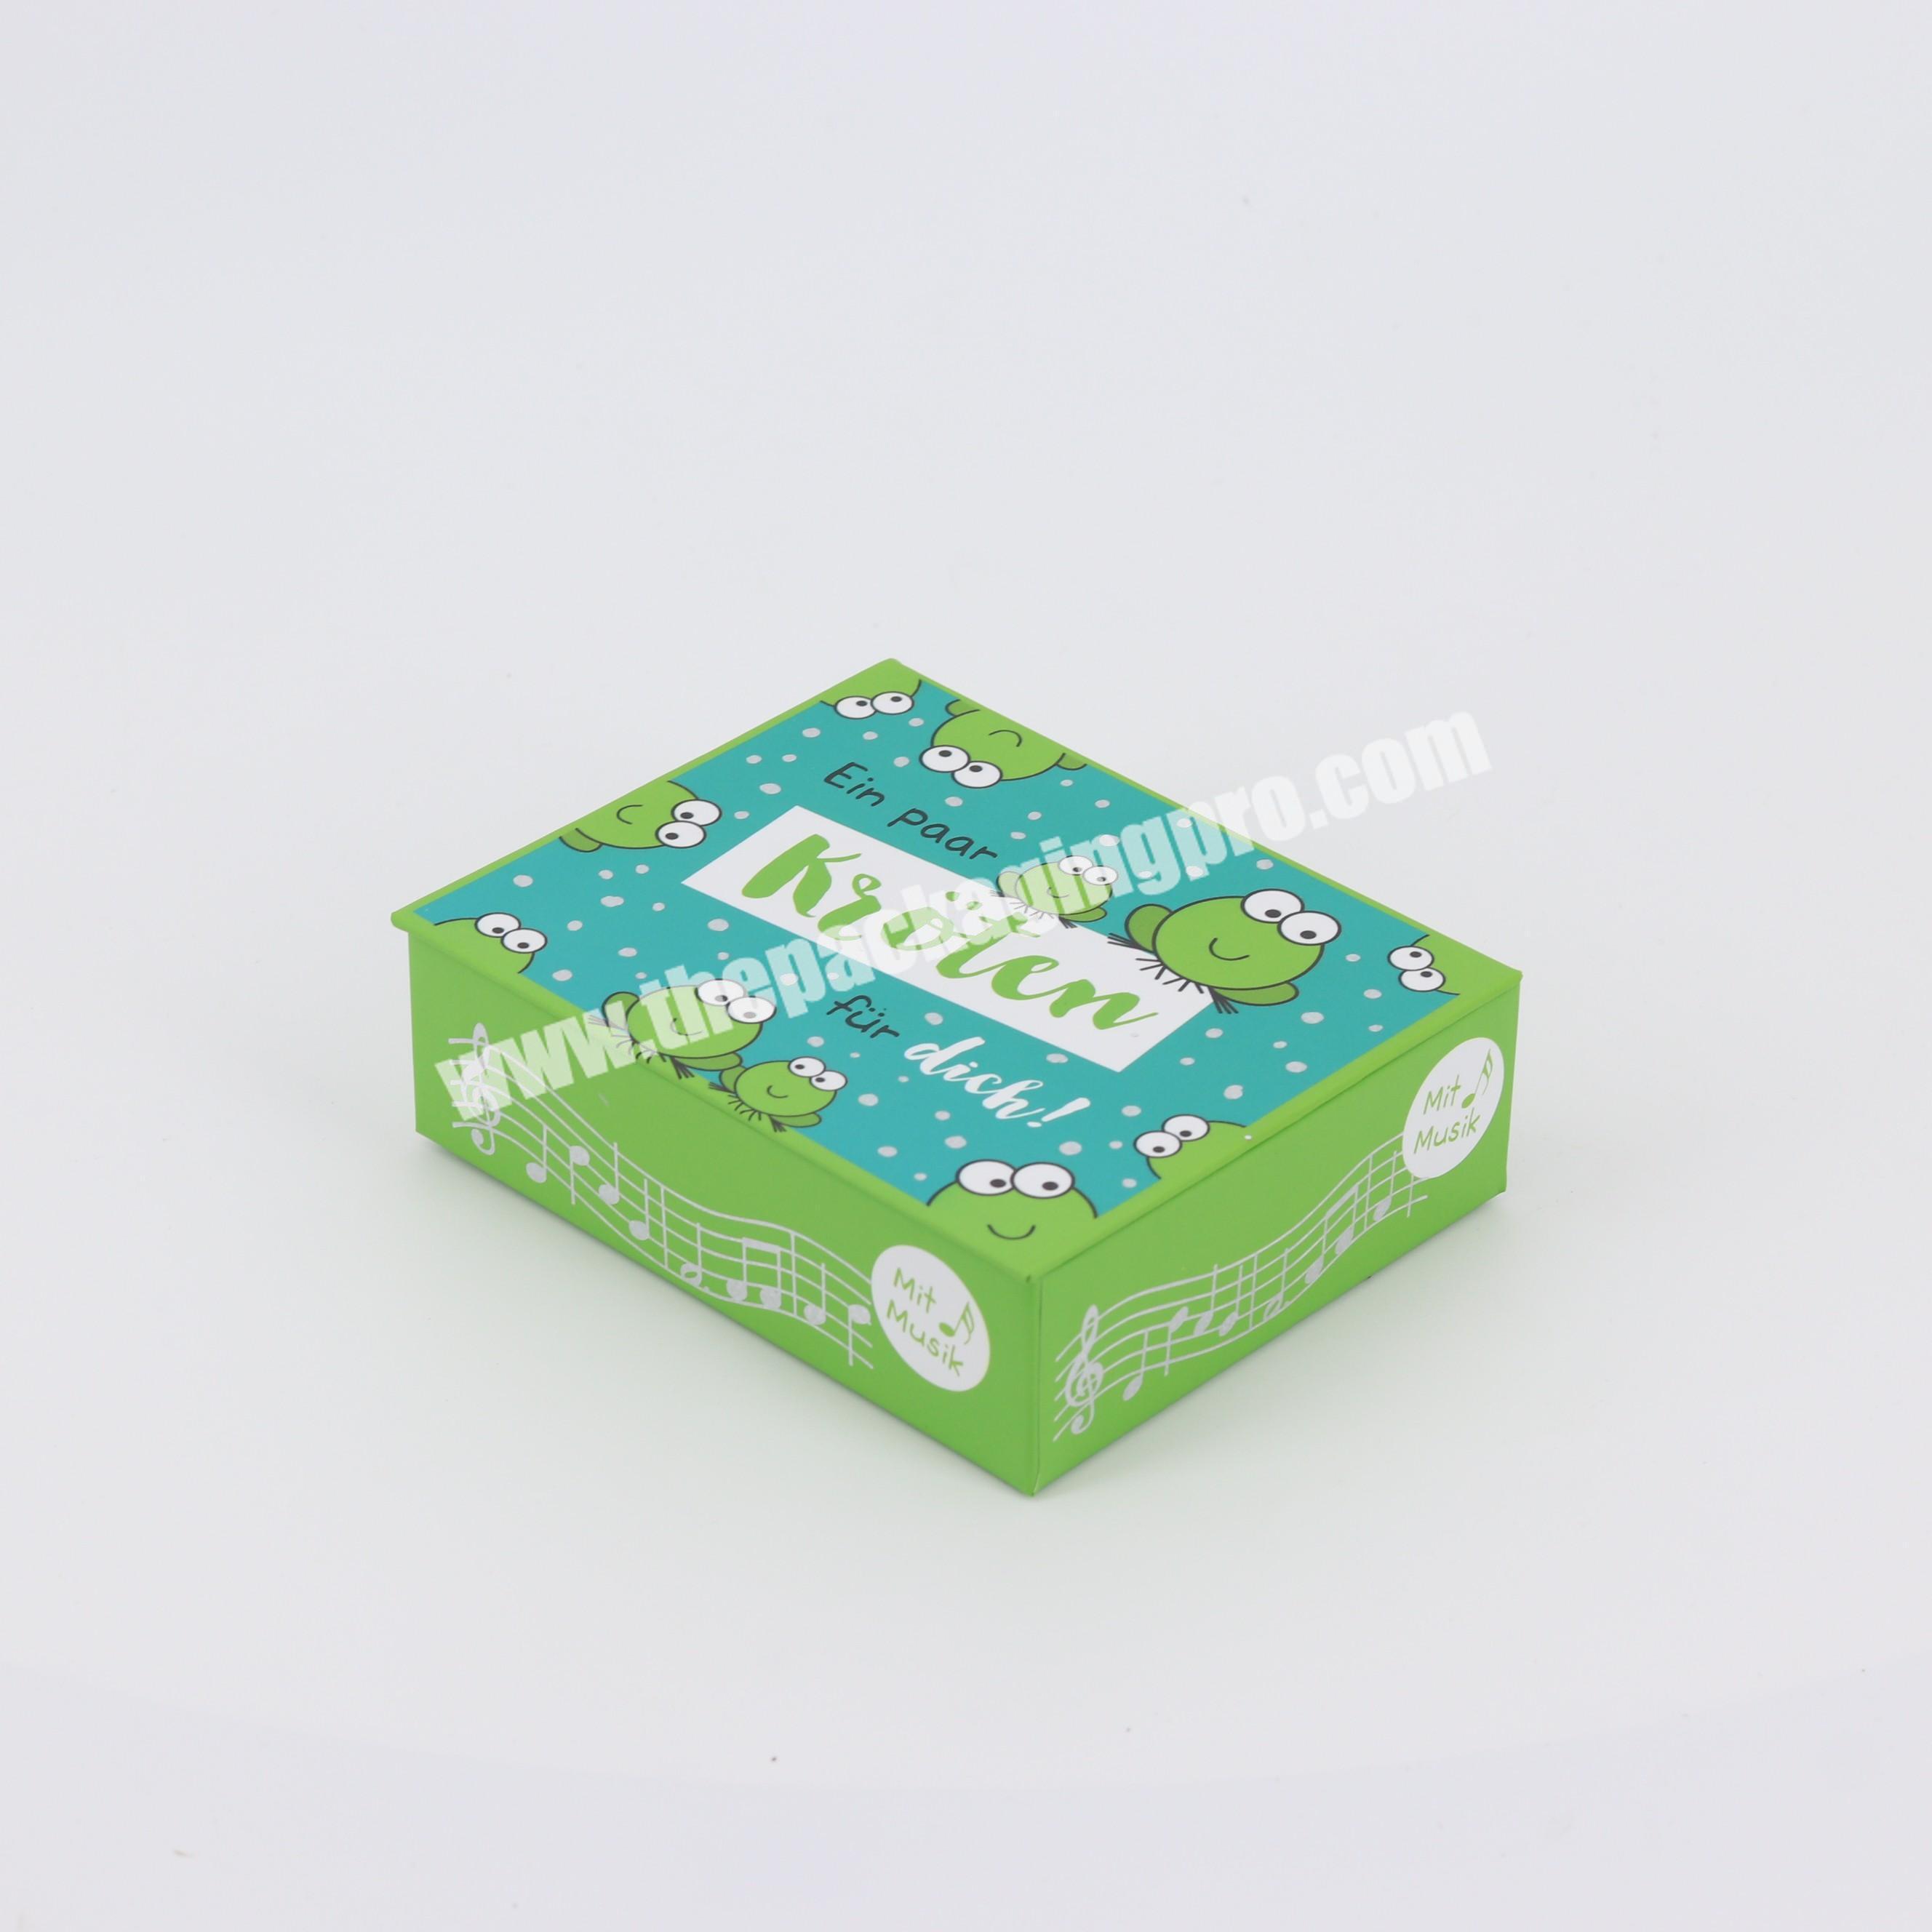 Wholesale factory price base Cartoons frog gift box with logo